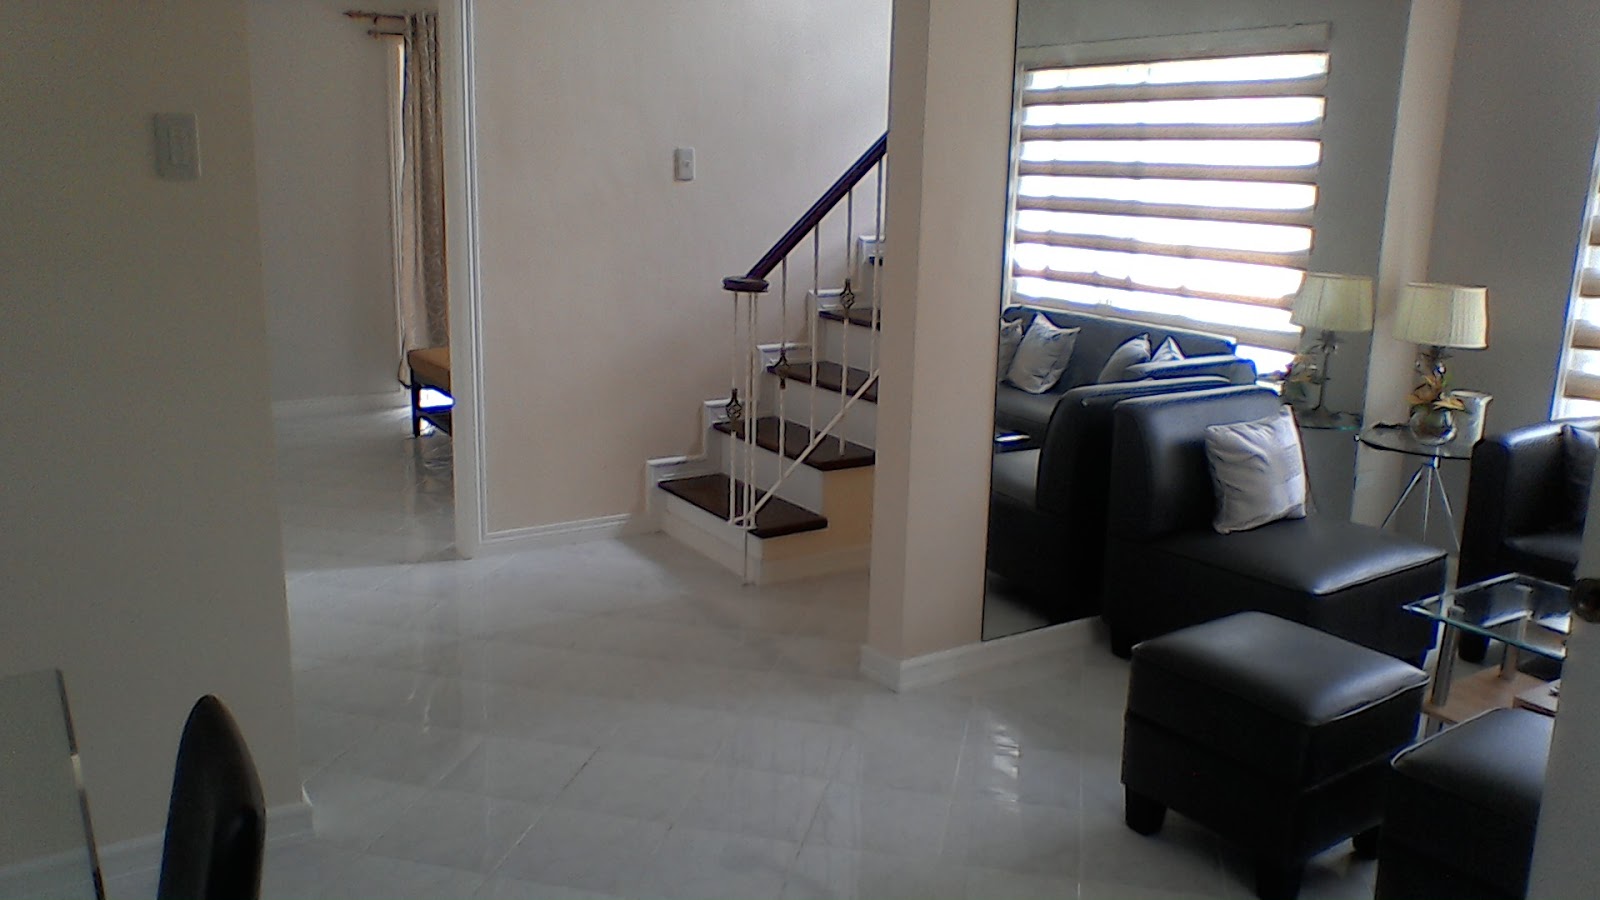 4 Bedrooms 3 Toilet & Bath, Jazmine model house and lot for sale